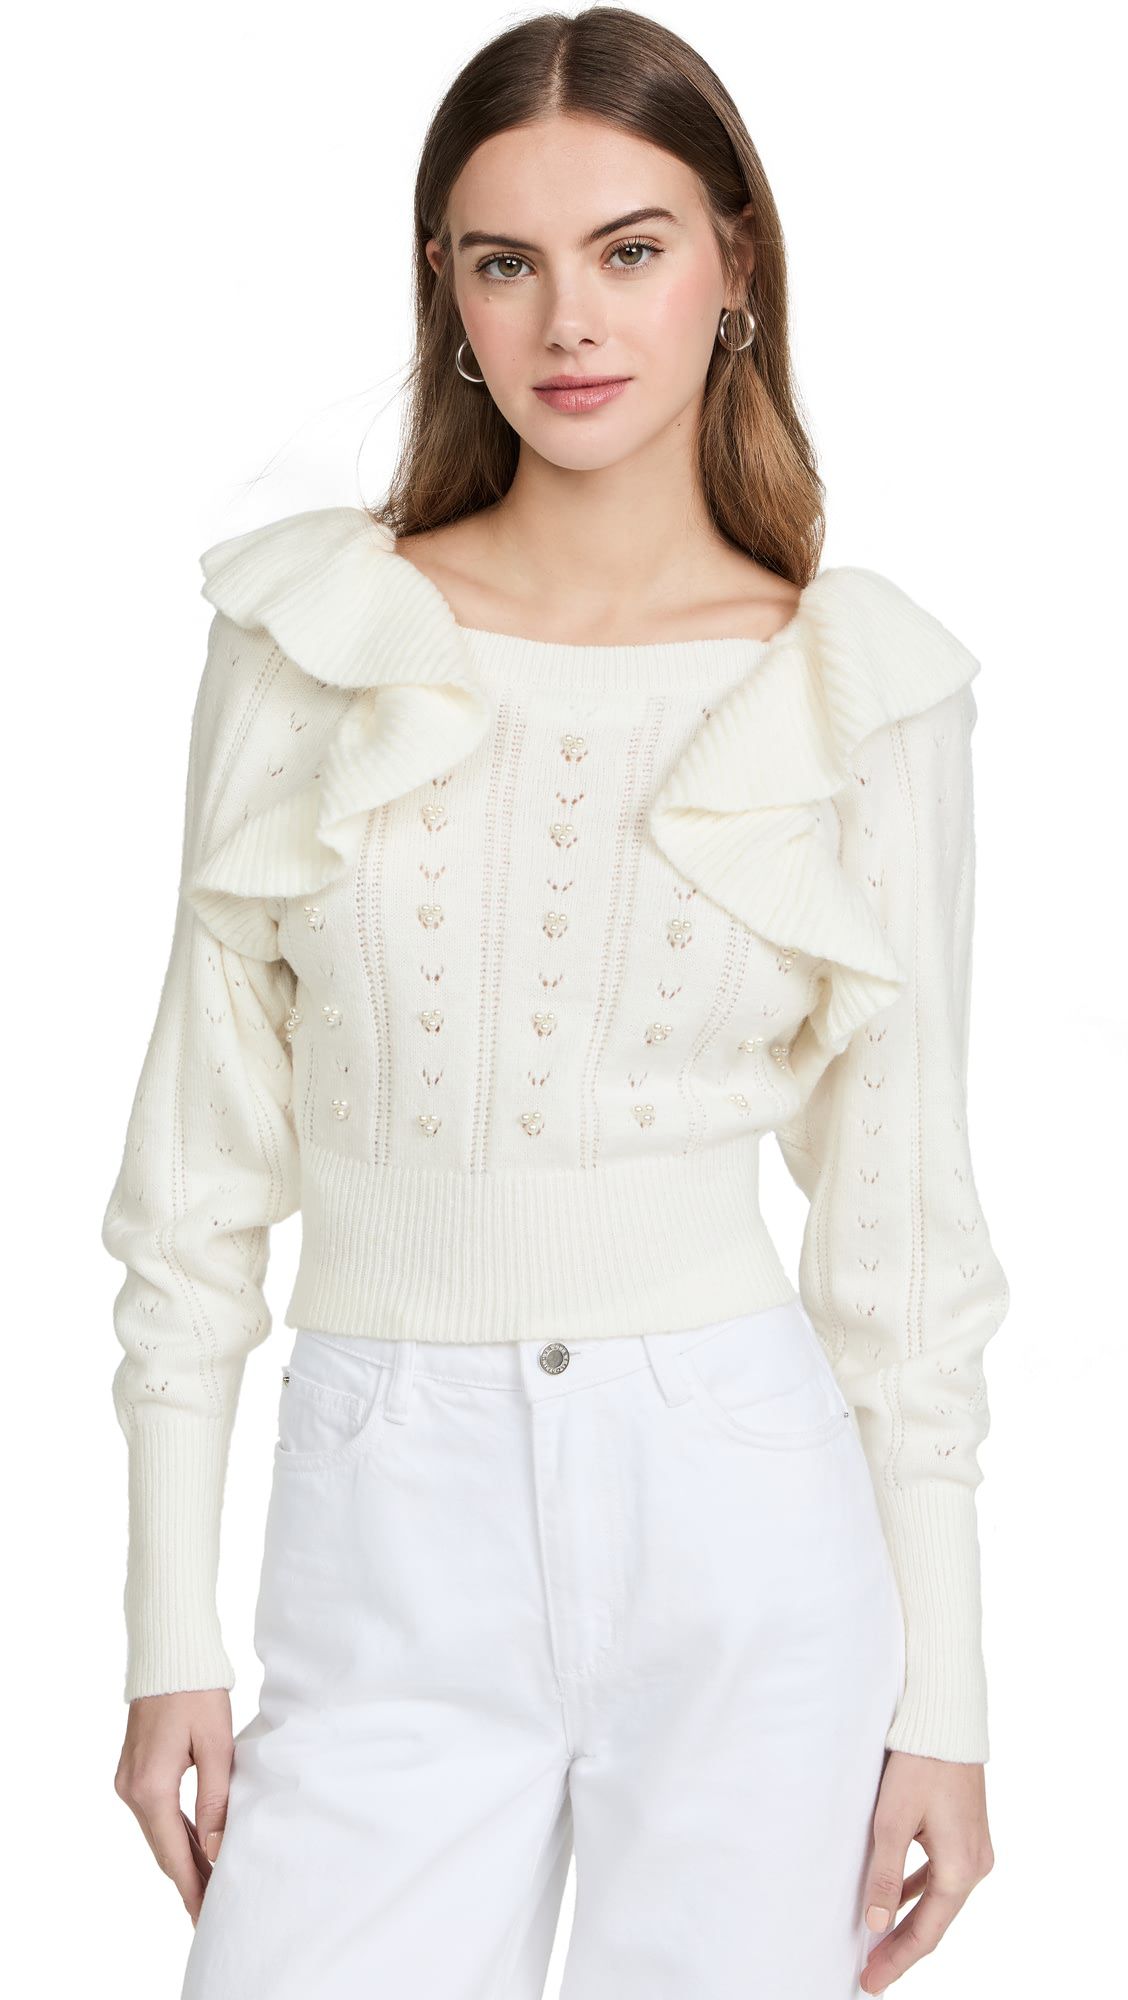 Womenswear Maker Casual Ruffled Long-sleeved Hollow-out Sweater